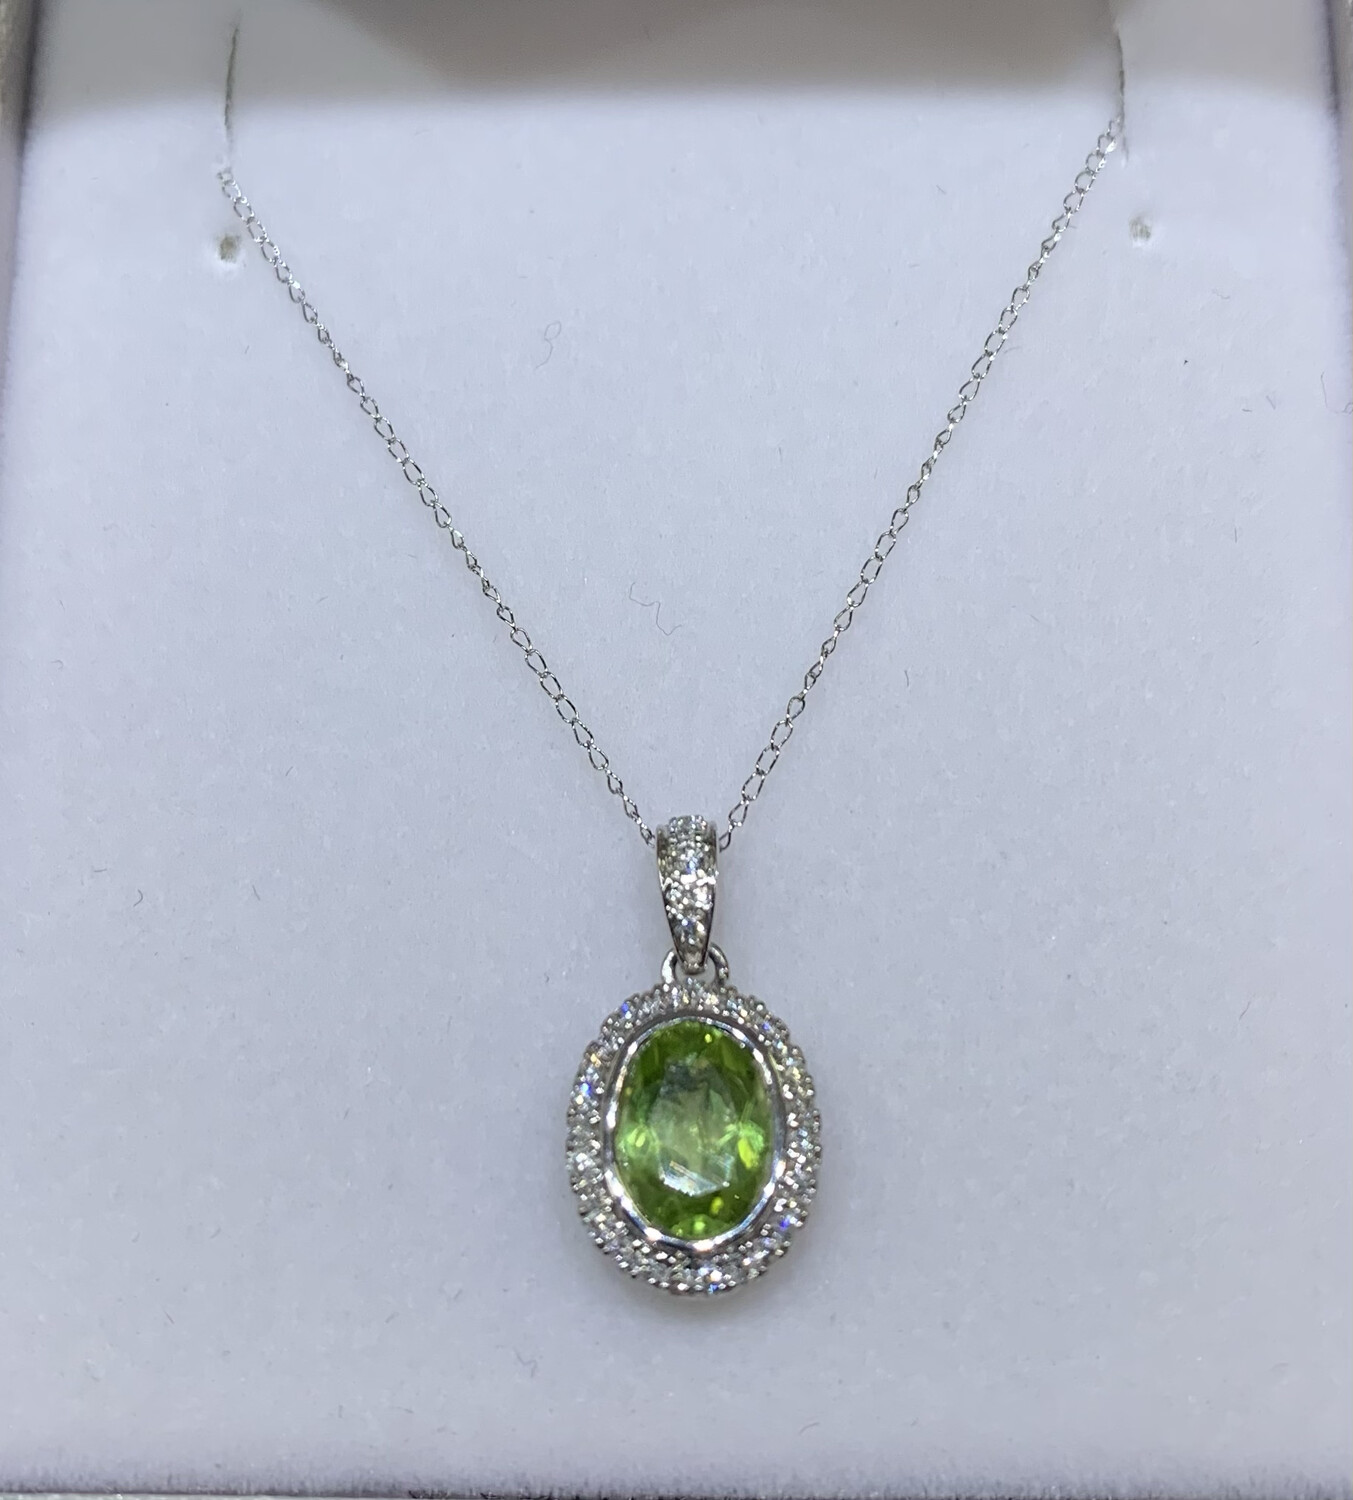 Peridot and Diamond Necklace Beautiful 1 Ct. Oval Shape with 19 Pts. of Diamonds set In 14 Kt. White Gold